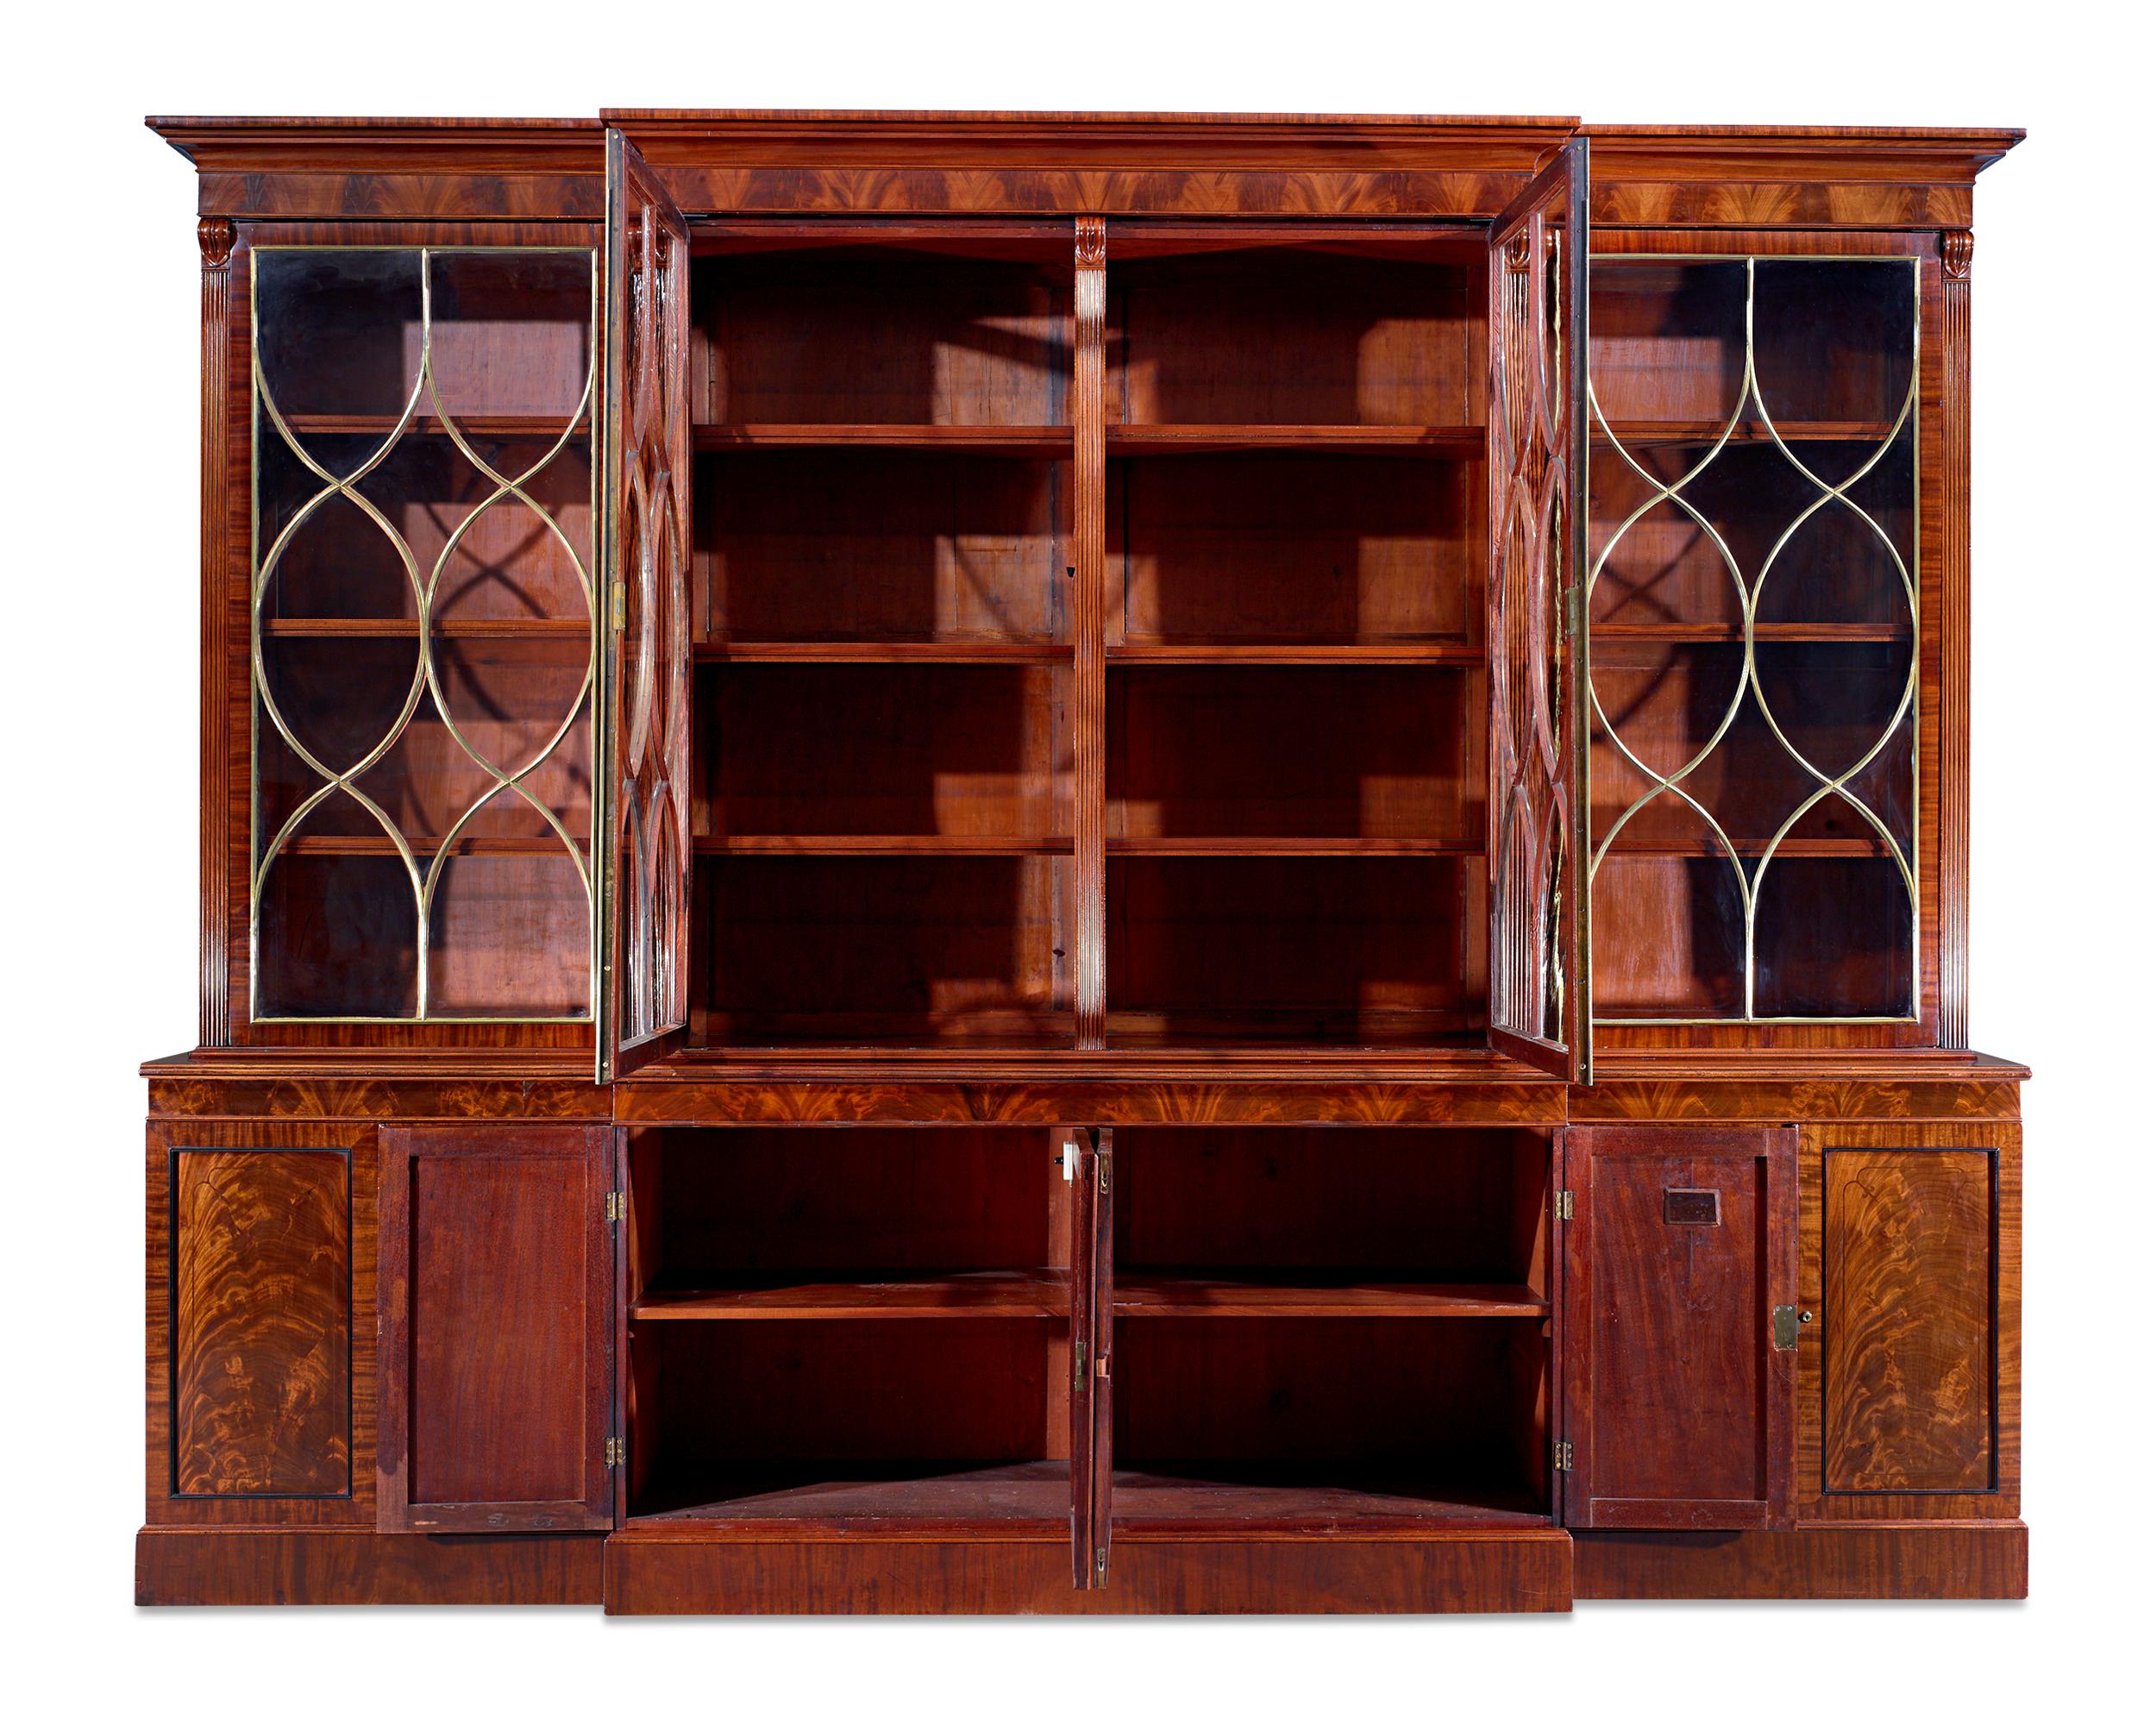 This incredibly rare Regency breakfront bookcase exhibits the superior caliber most closely attributed to the famed Gillows of Lancaster. Measuring over 11-feet wide, this monumental cabinetry masterpiece combines luxurious materials with the expert